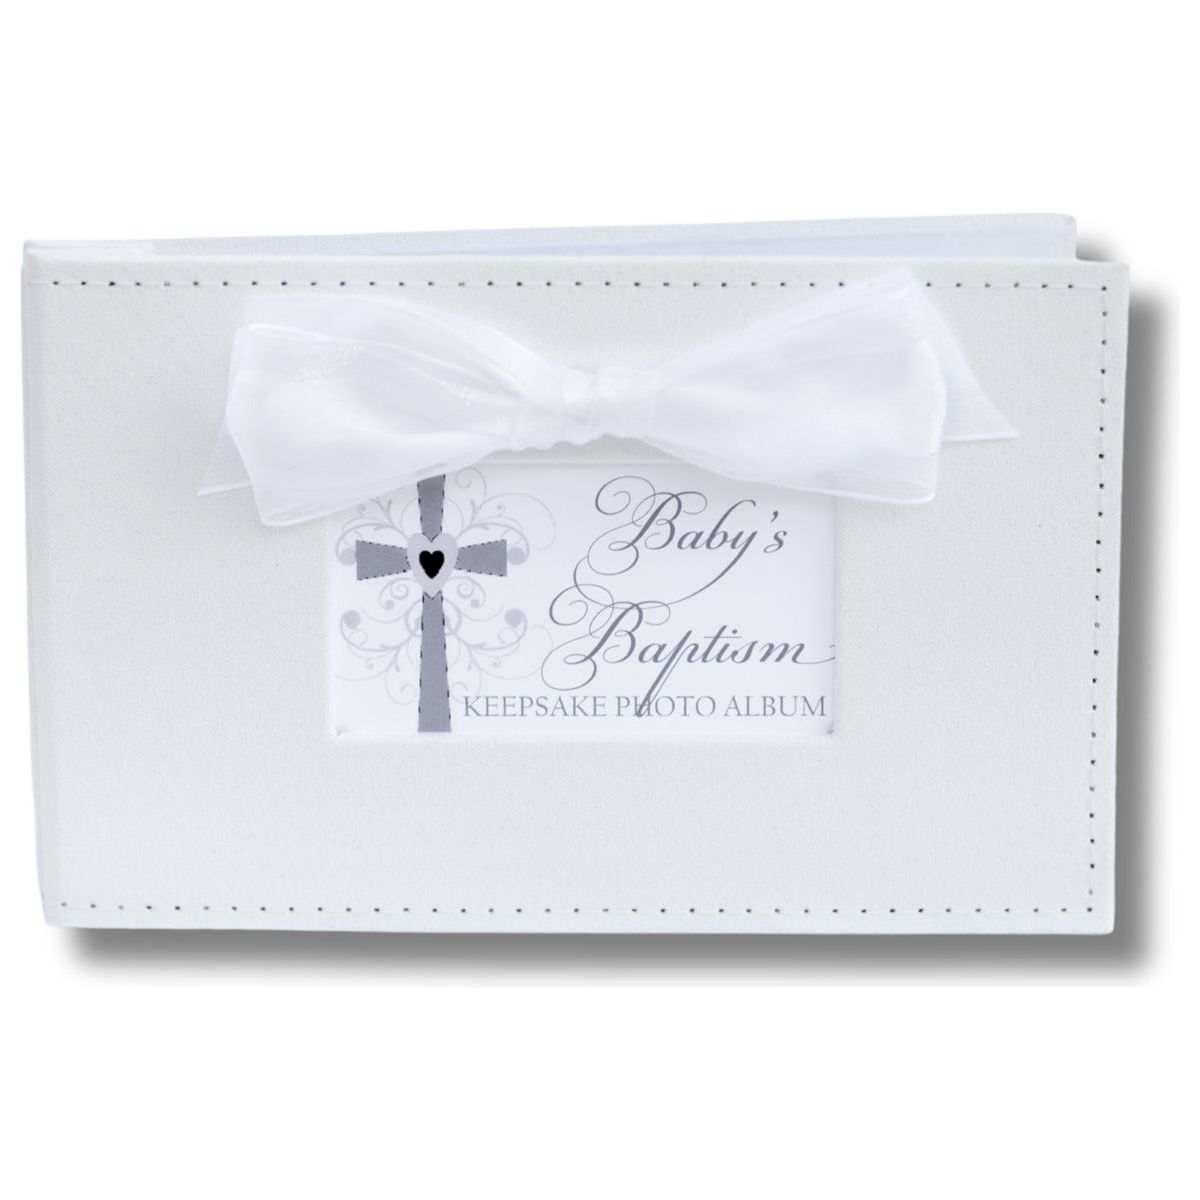 Baby's Baptism white faux suede keepsake photo album with white sheer bow.